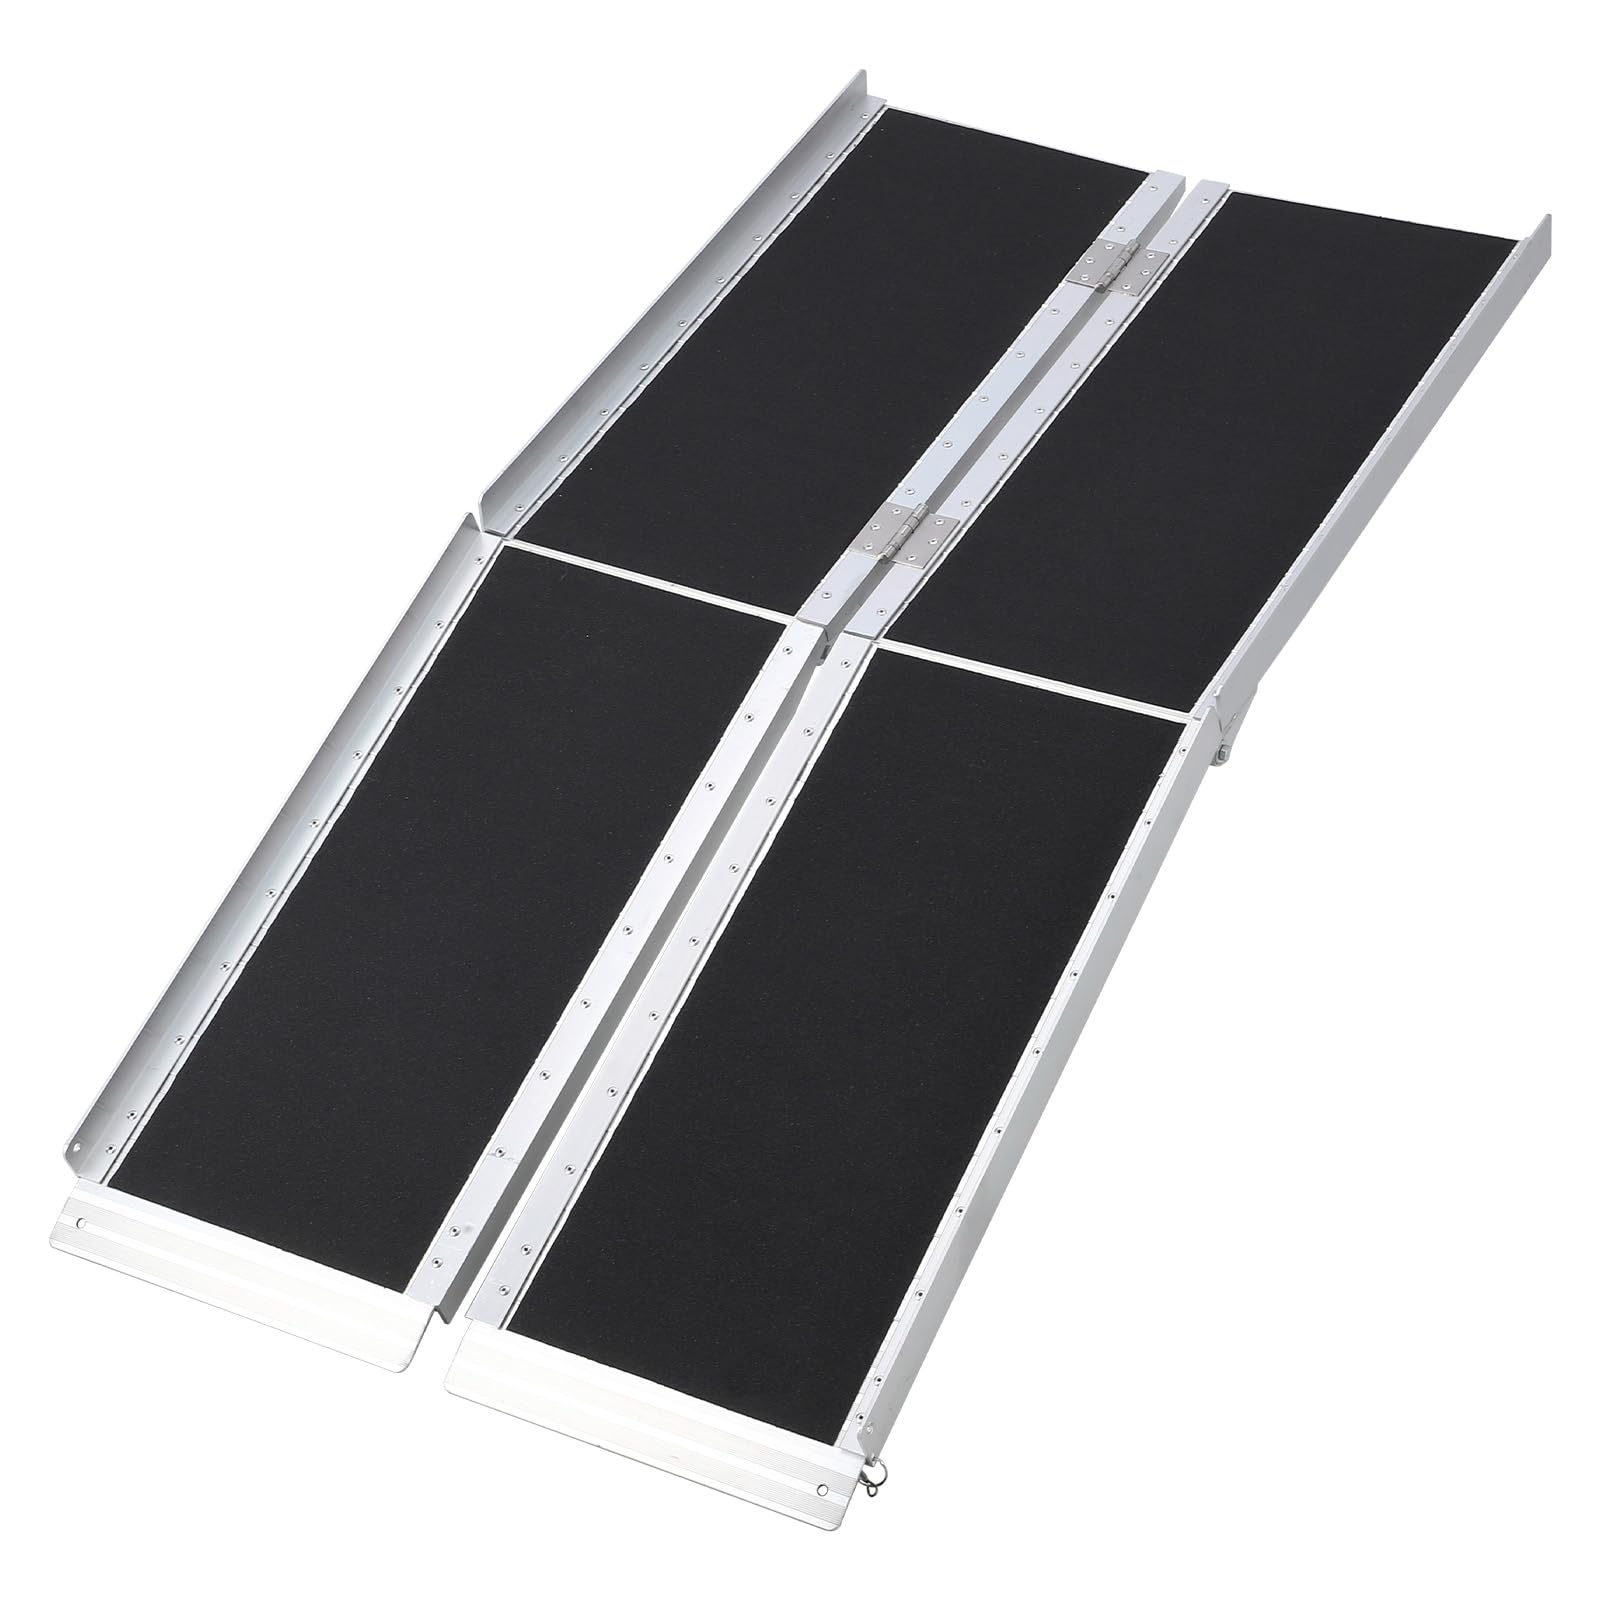 6FT Portable Wheelchair Ramp, Folding Wheelchair Ramp for Steps, Non-Slip Aluminum Ramps with Handle, Portable Ramps for Wheelchairs Home Car Doorways, Weight Capacity Up to 800 LBS